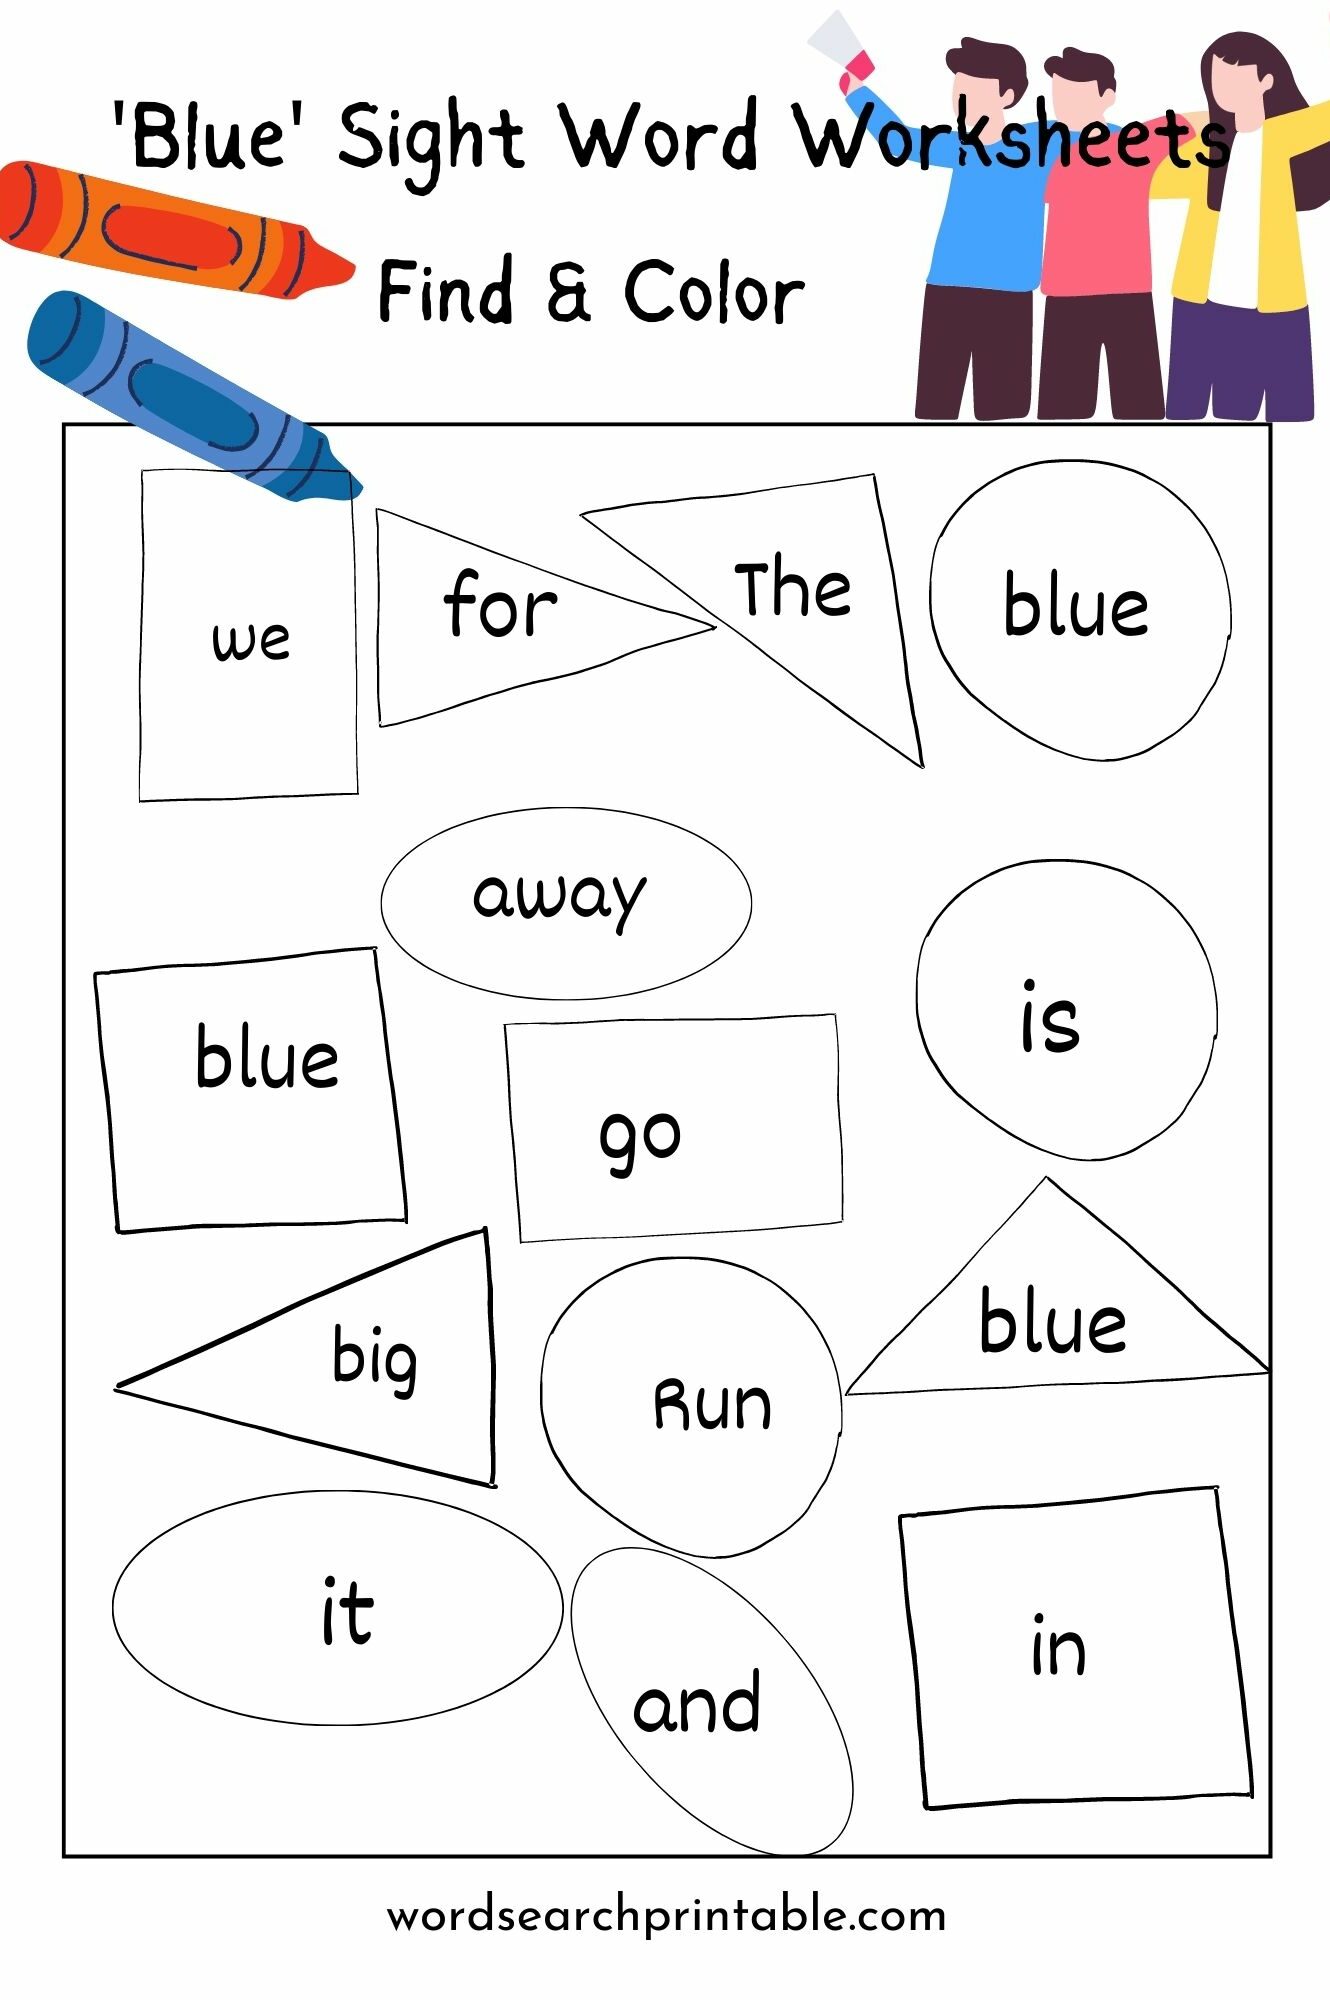 Find ‘Blue’ and Color the shape